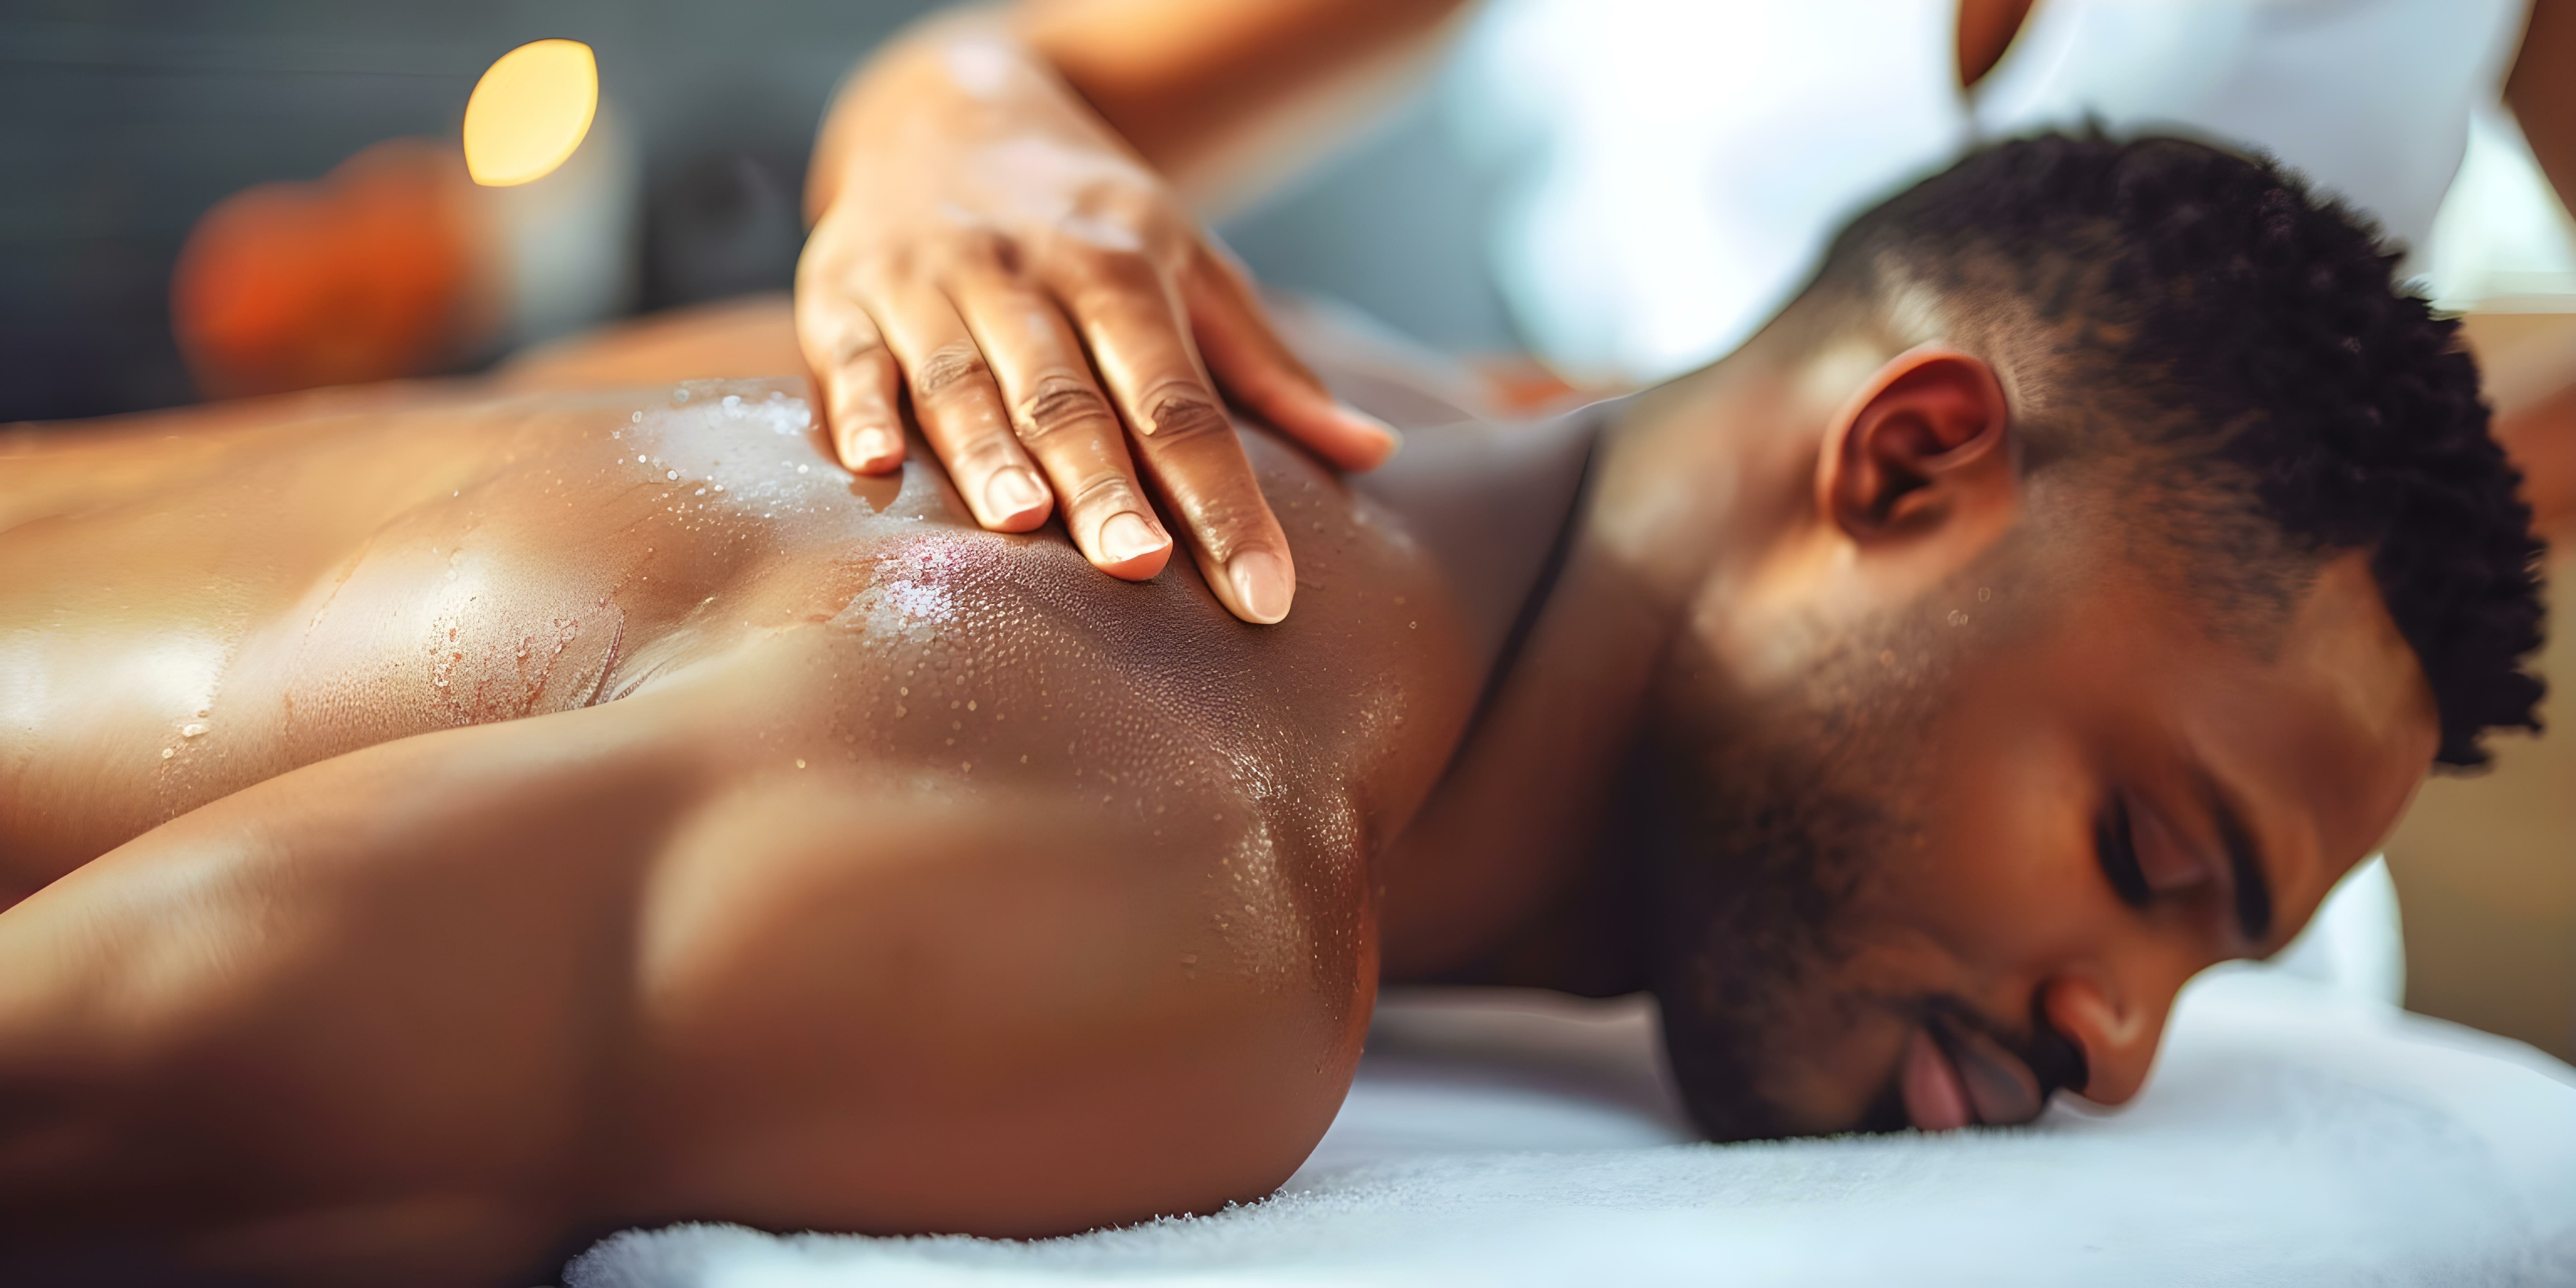 A man receiving a back massage at a spa representing relaxation and selfcare at a wellness center. Concept Relaxation techniques, Wellness centers, Massage therapy, Self-care activities